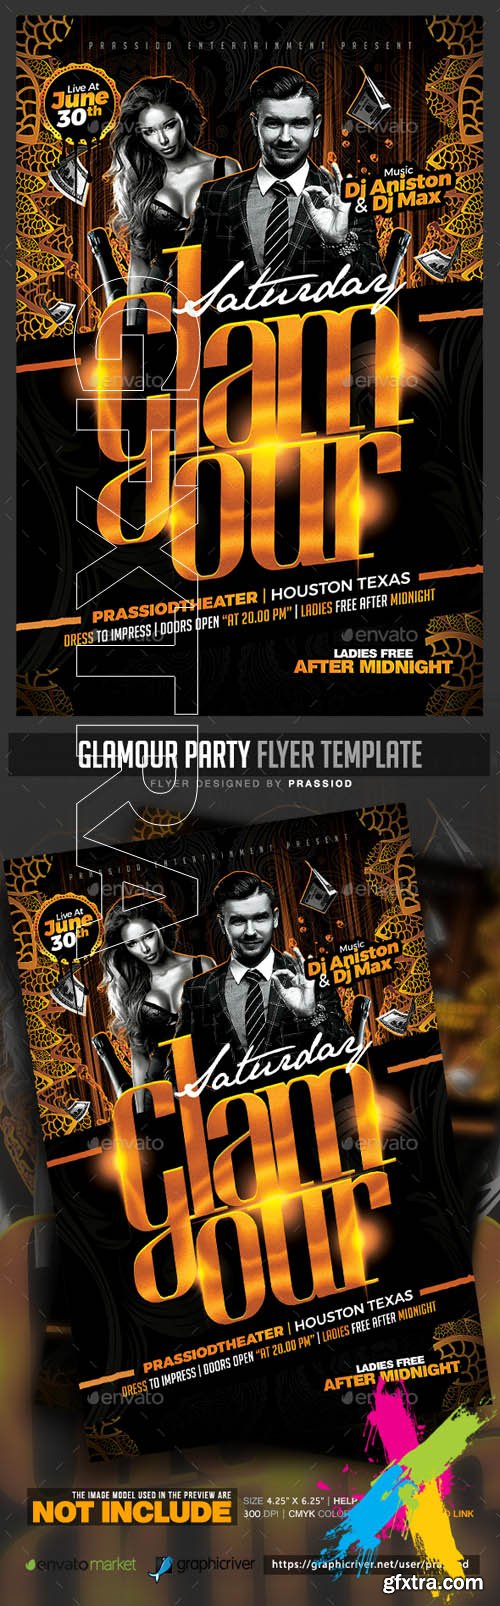 Graphicriver - Glamour Party Flyer Template 20371798